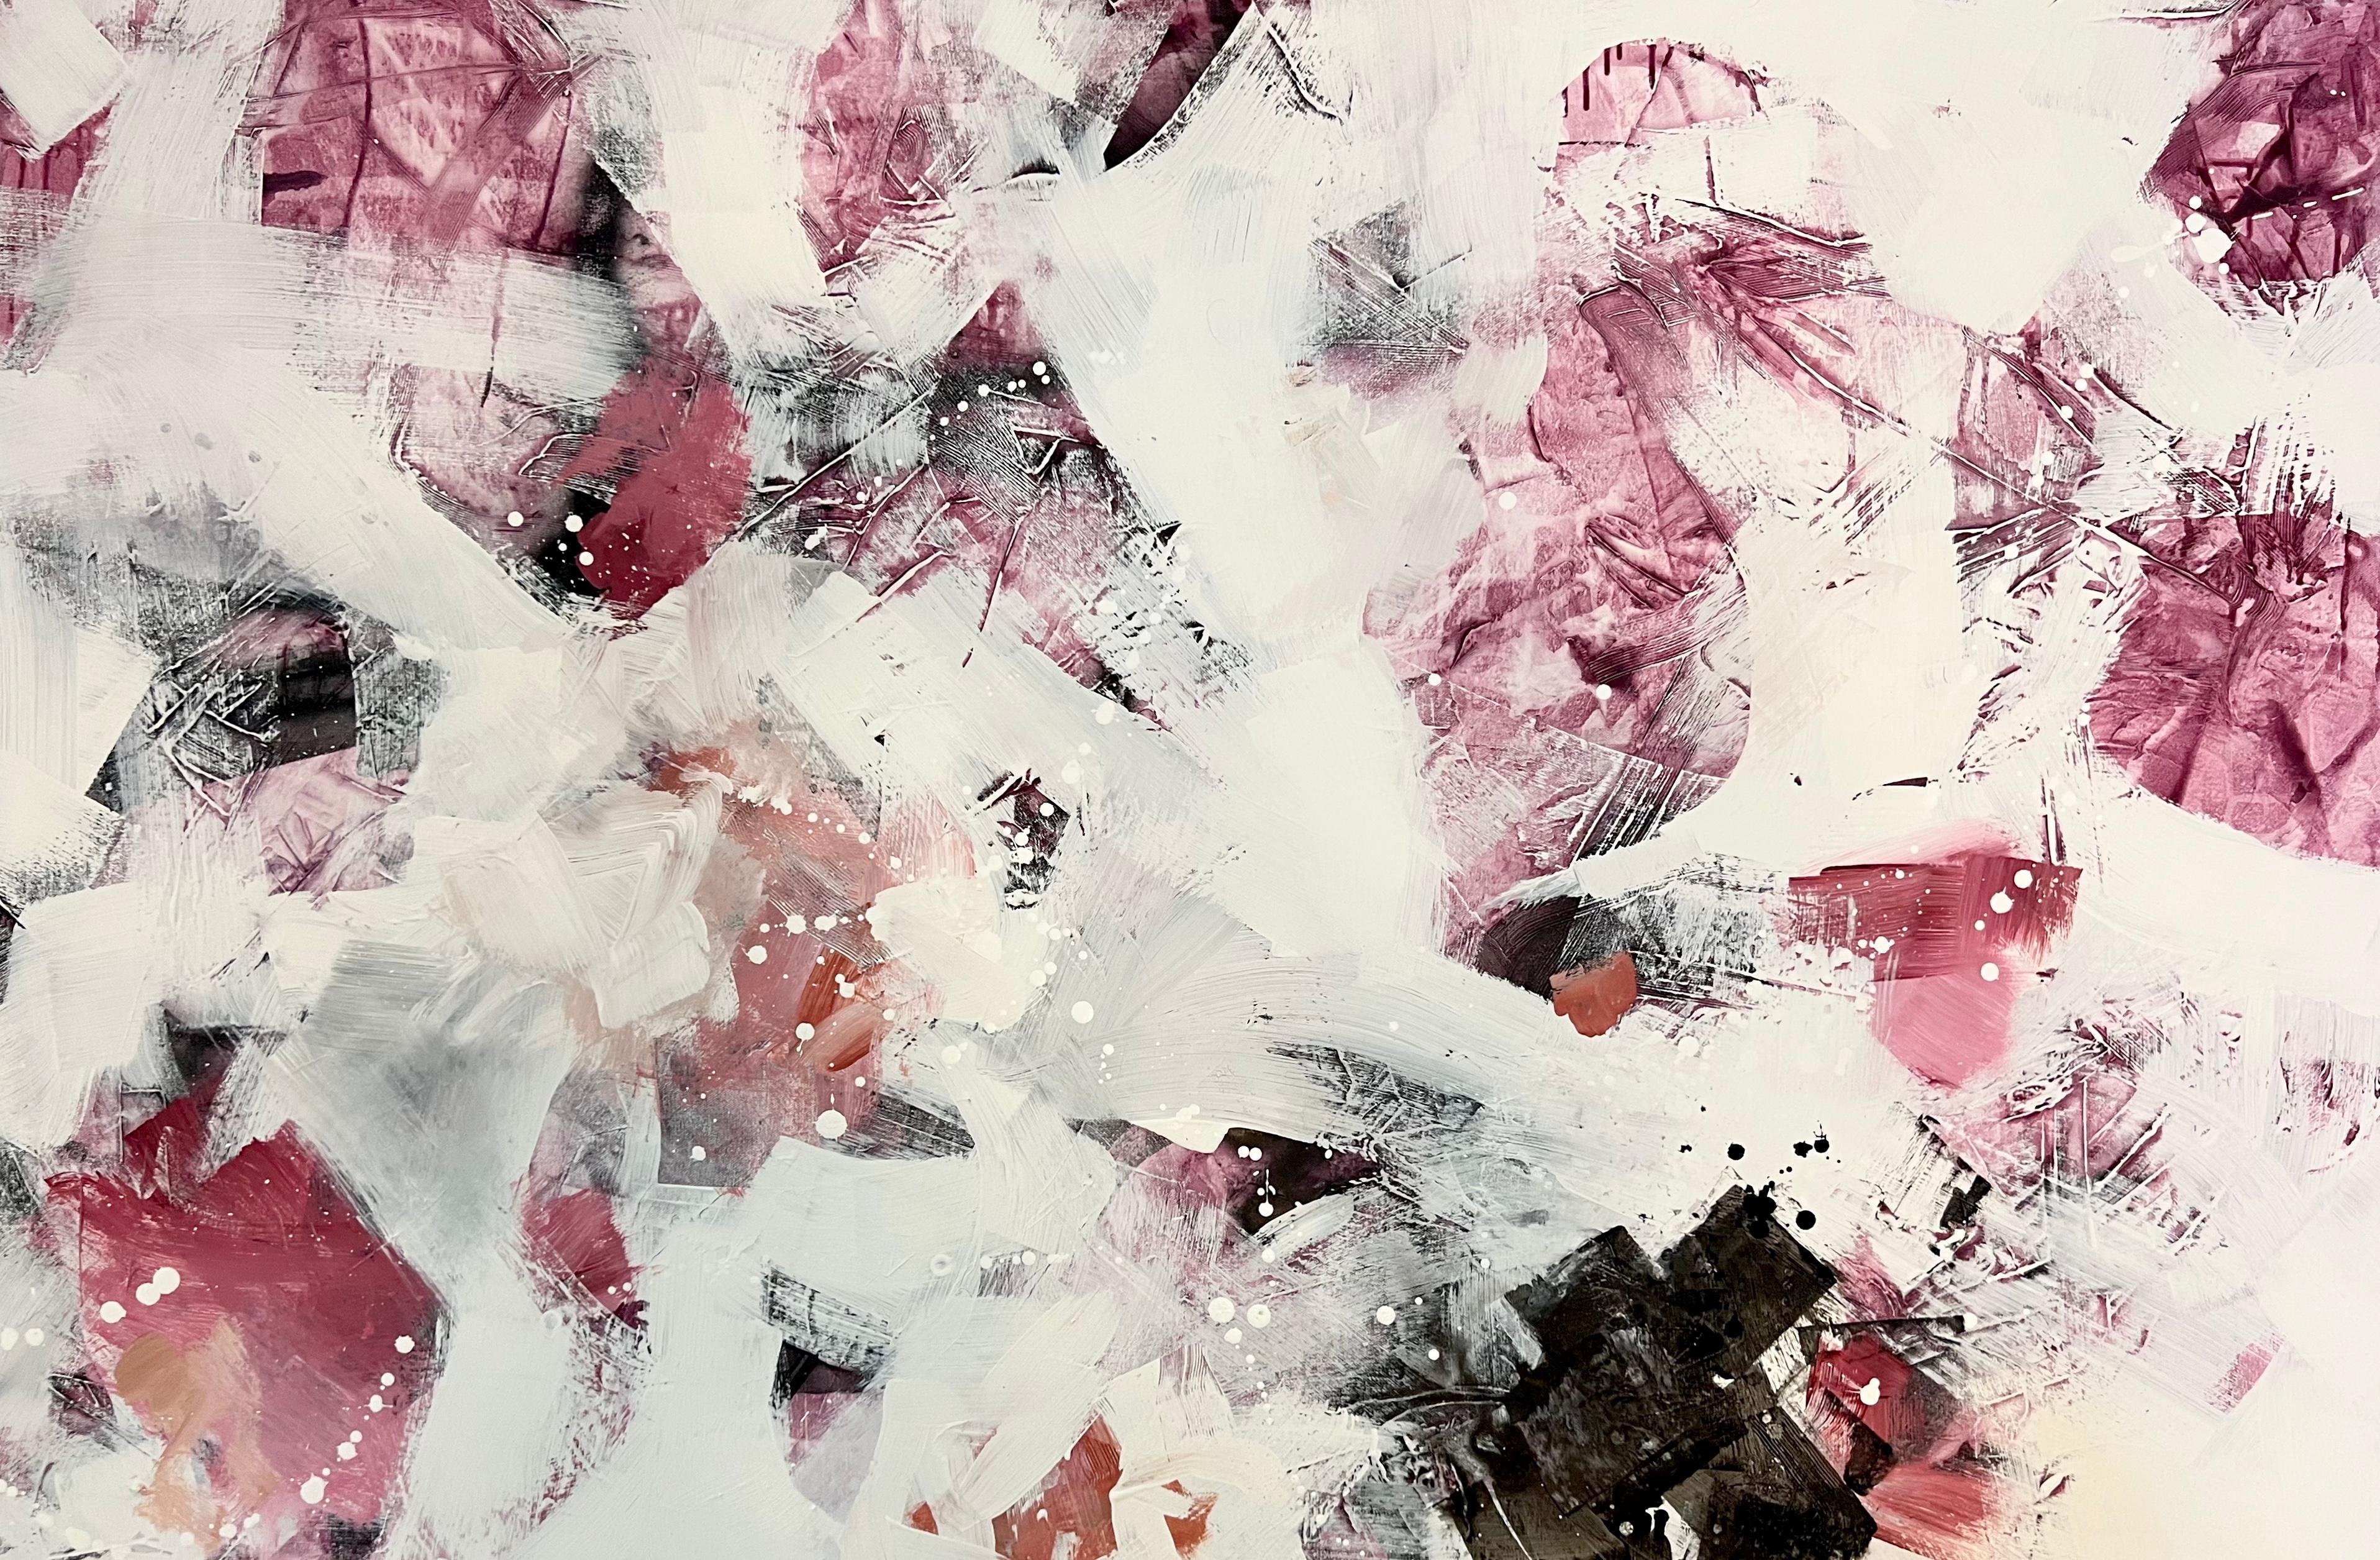 Bittersweet Symphony is mixed media, abstract painting on canvas, using white, blacks, pinks and red to create the perfect balance between whimsical and edgy. 

Bittersweet Symphony
40" x 60"
Mixed Media
Abstract Painting on Canvas 
Signed 

Annie